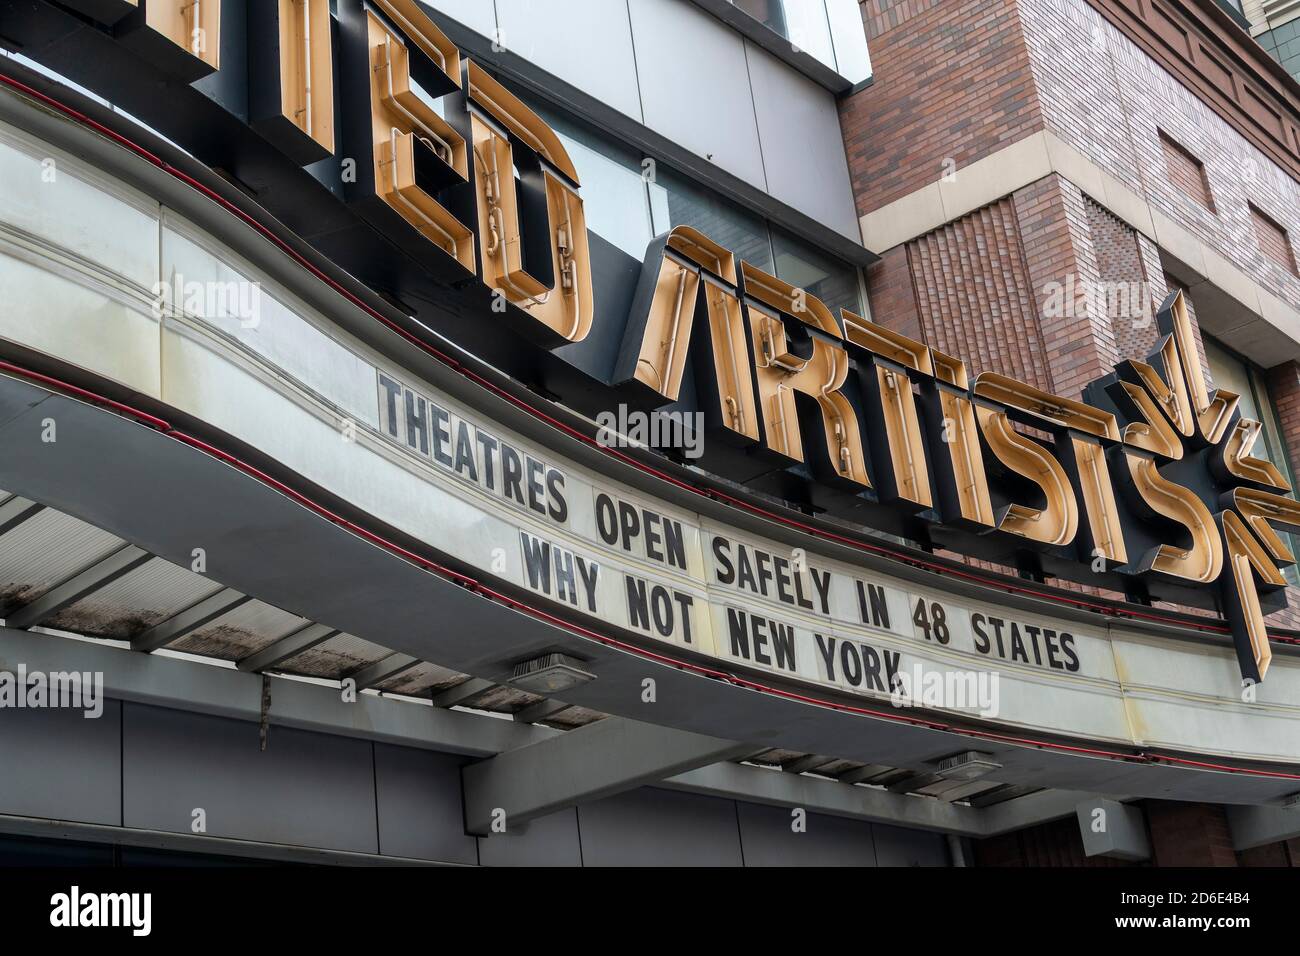 The marquee of the United Artists multiplex in Brooklyn Heights in New York on Saturday, October 10, 2020 protests the closing of movie theaters in New York. Theaters across New York State have displayed banners calling on Gov. Andrew Cuomo to reopen theaters. (© Richard B. Levine) Stock Photo